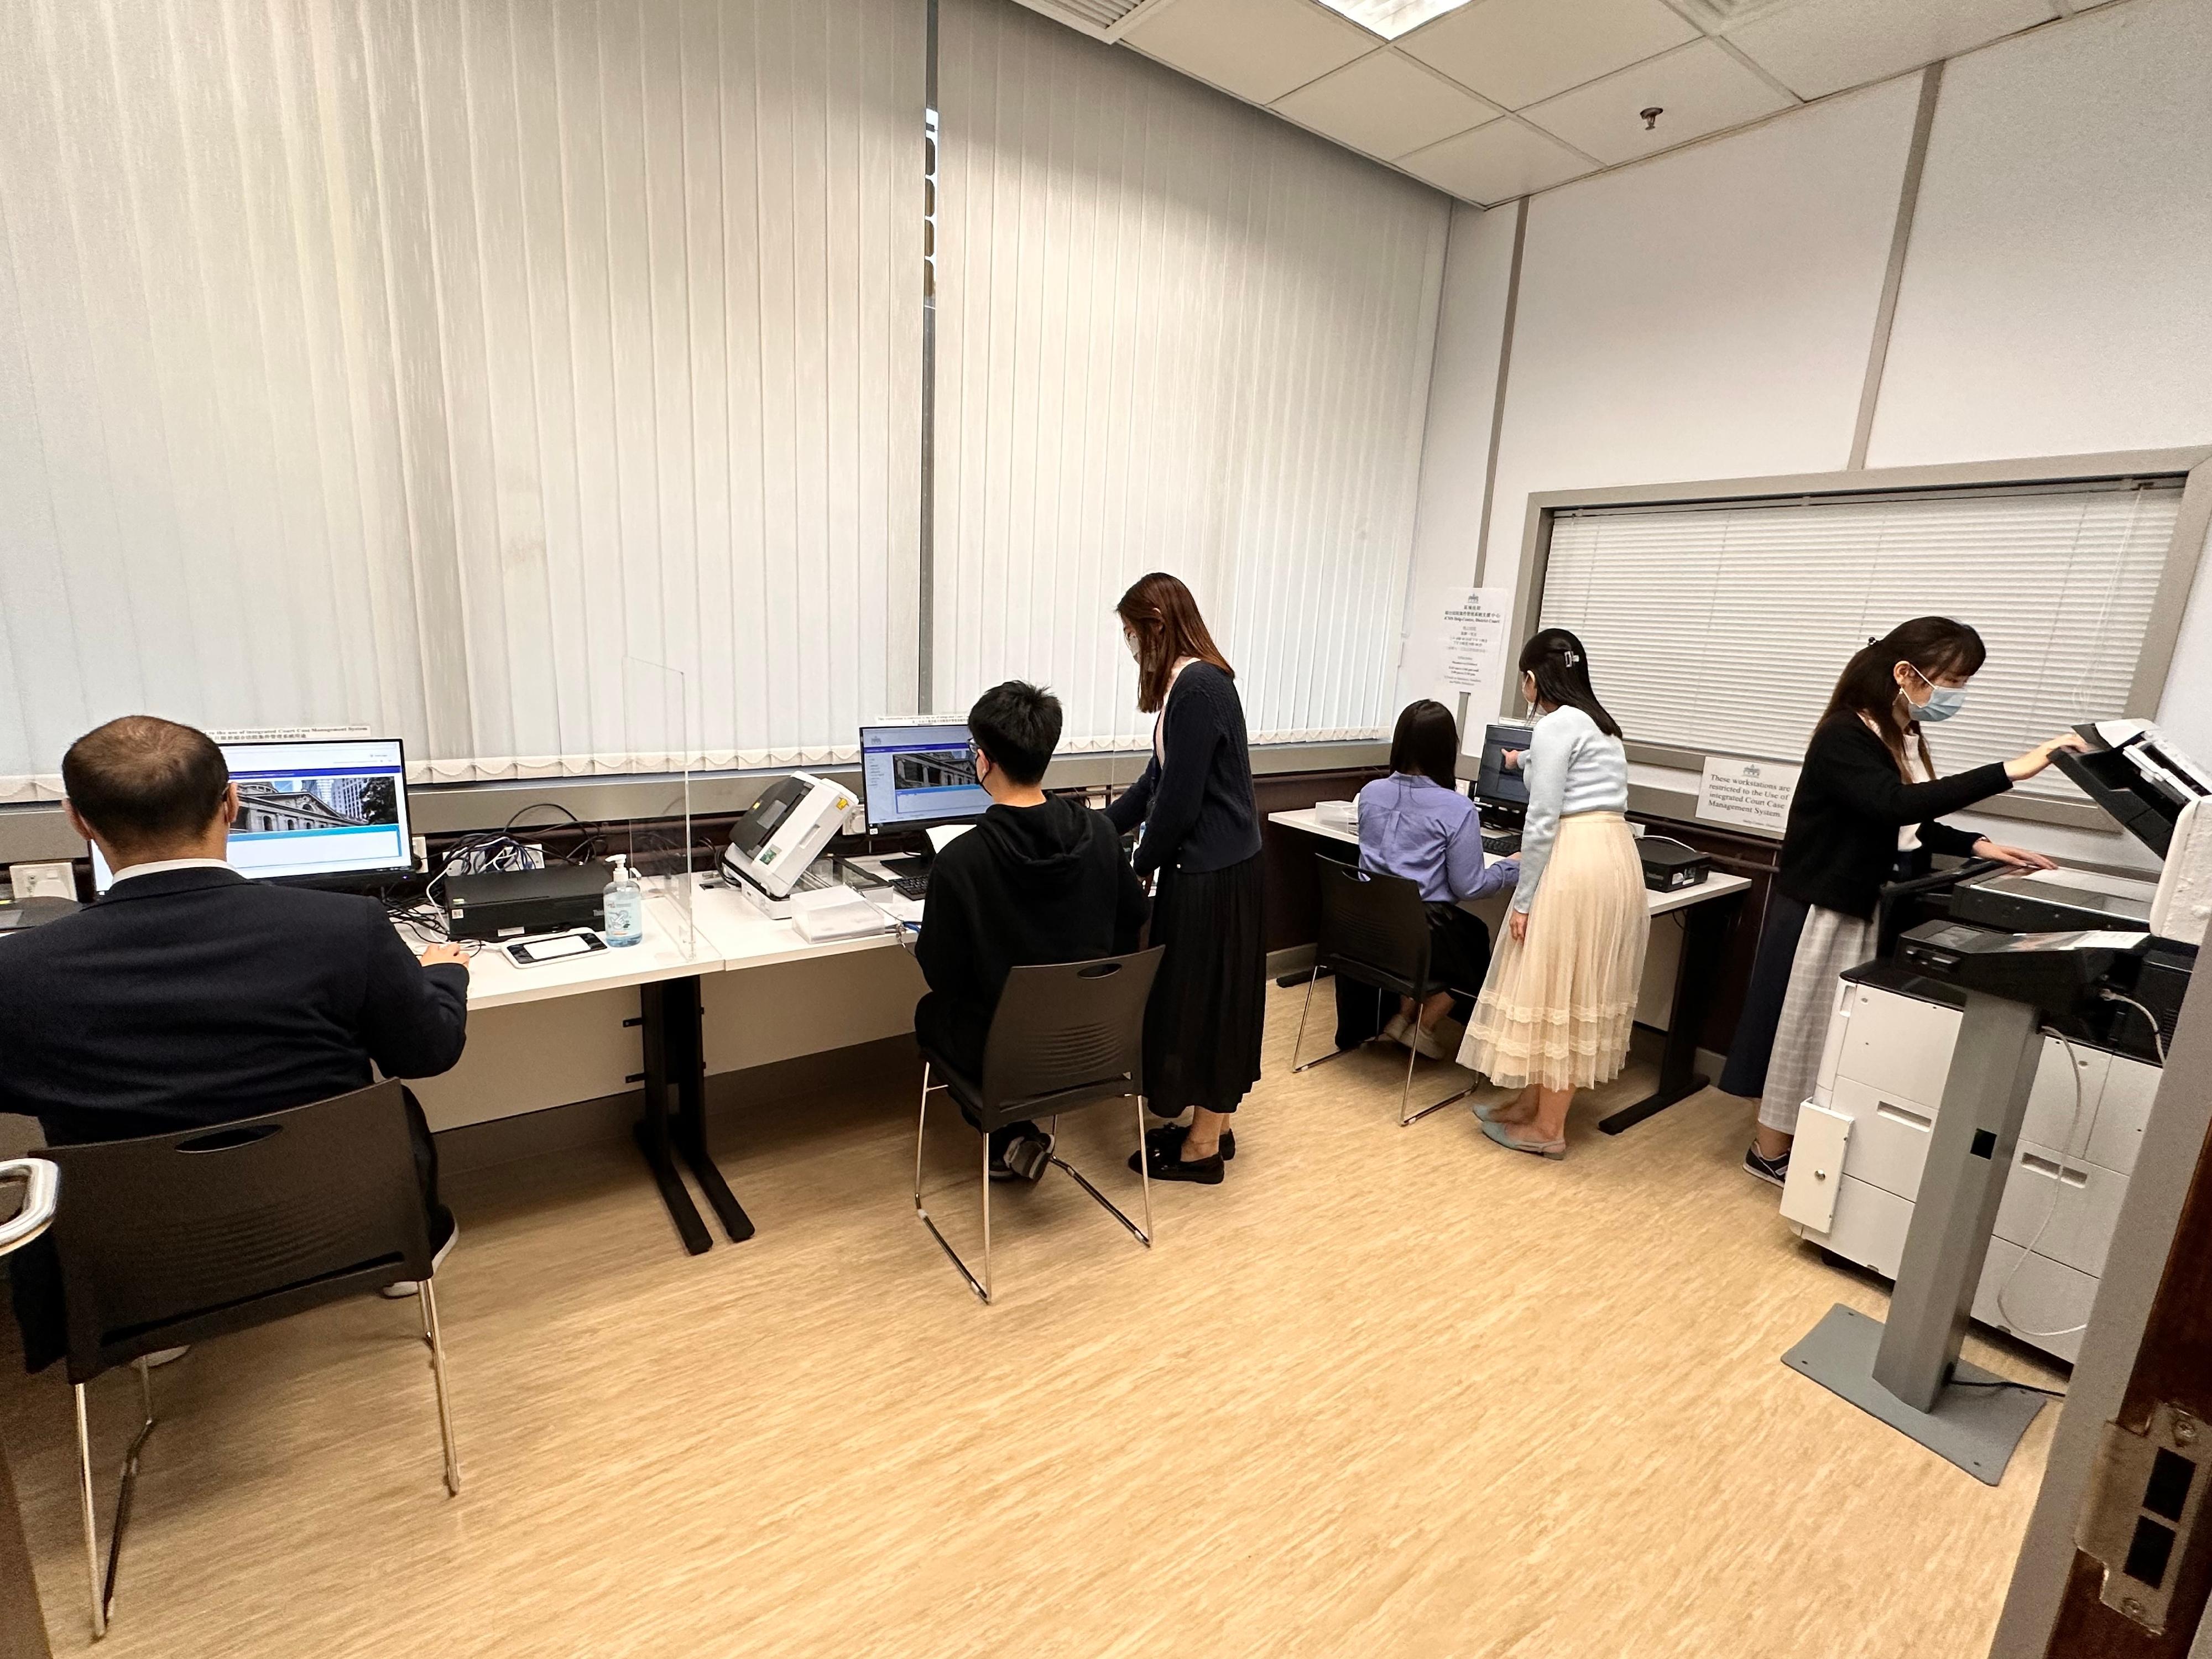 Apart from establishing telephone hotlines and email address for handling enquiries from users, the Judiciary has also set up an iCMS Help Centre on 5/F, Wanchai Tower to assist court users in using electronic filing services through the system.